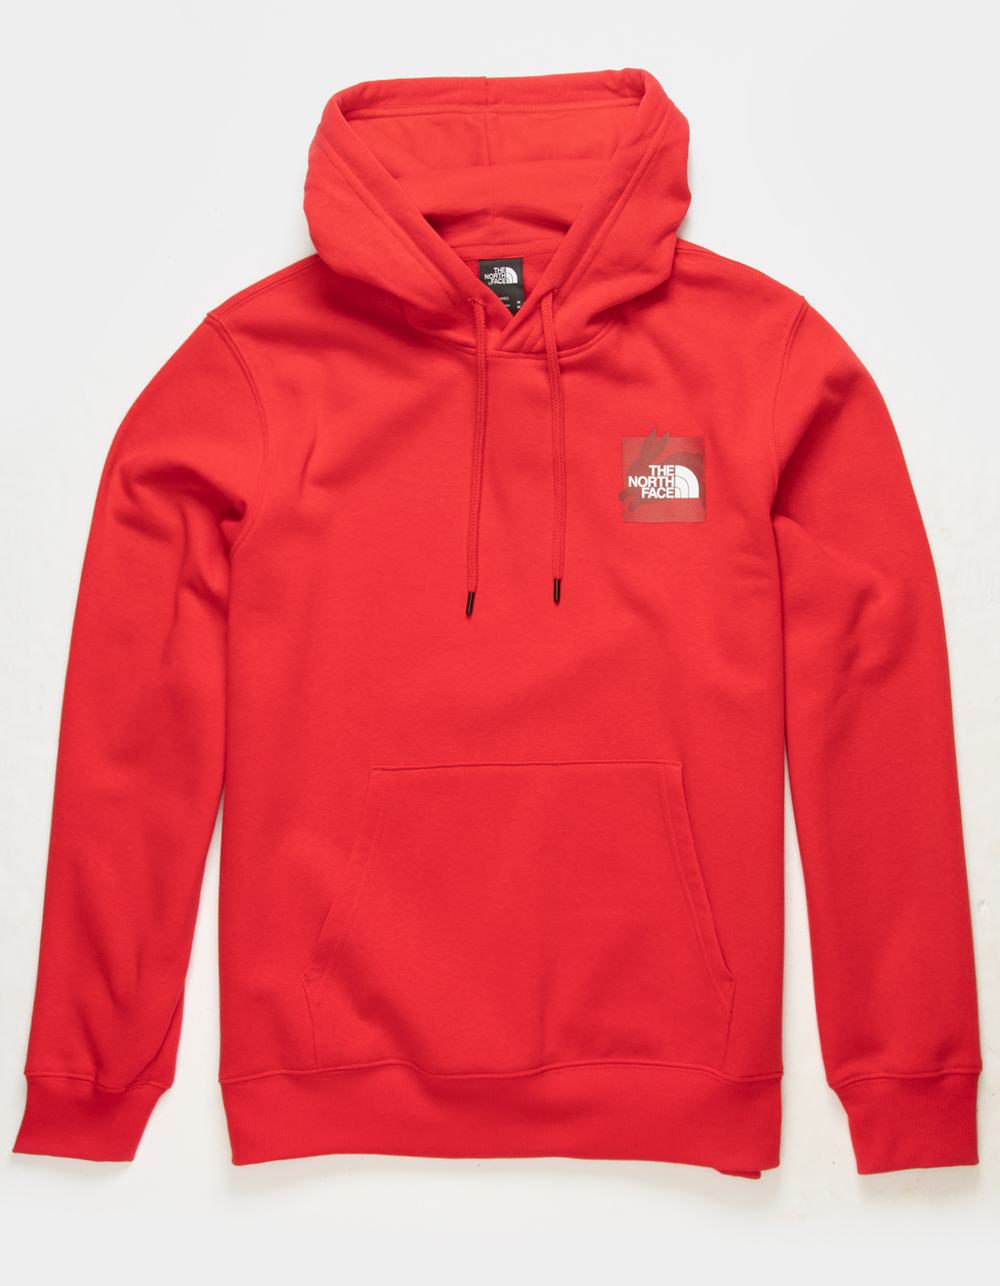 THE NORTH FACE Lunar New Year Mens Hoodie - RED | Tillys